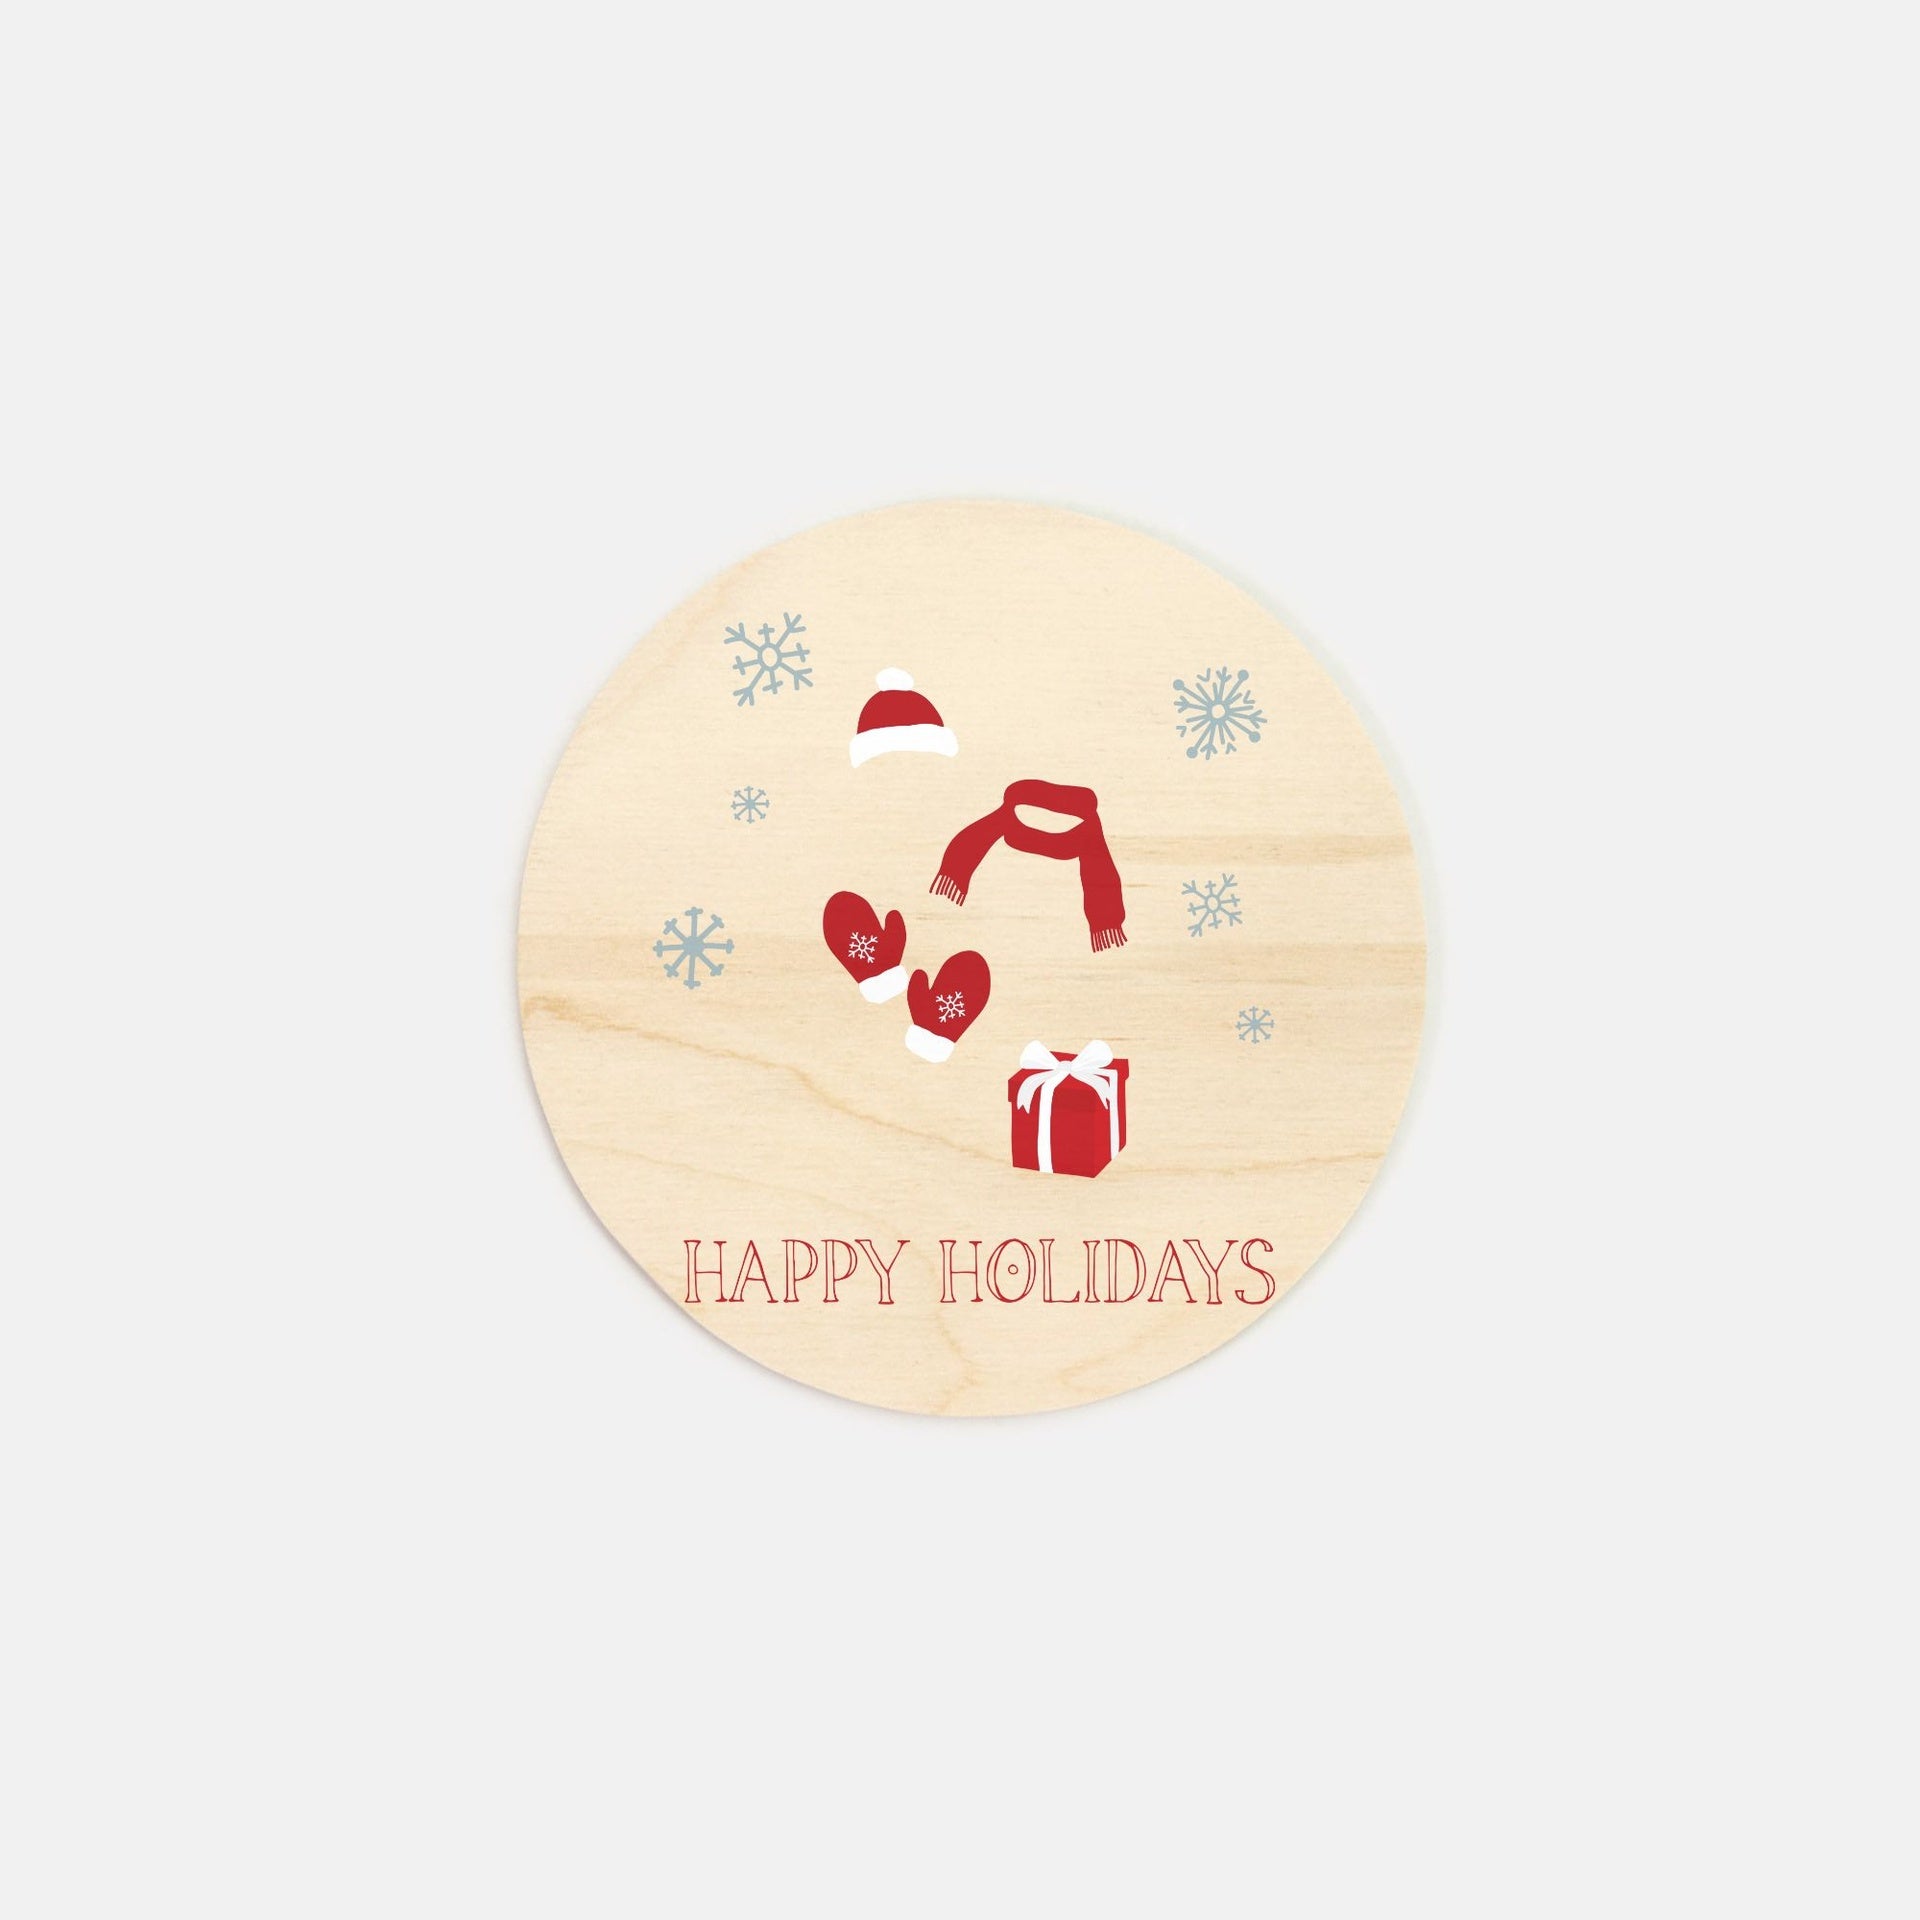 6" Round Wood Sign - Red Happy Holidays